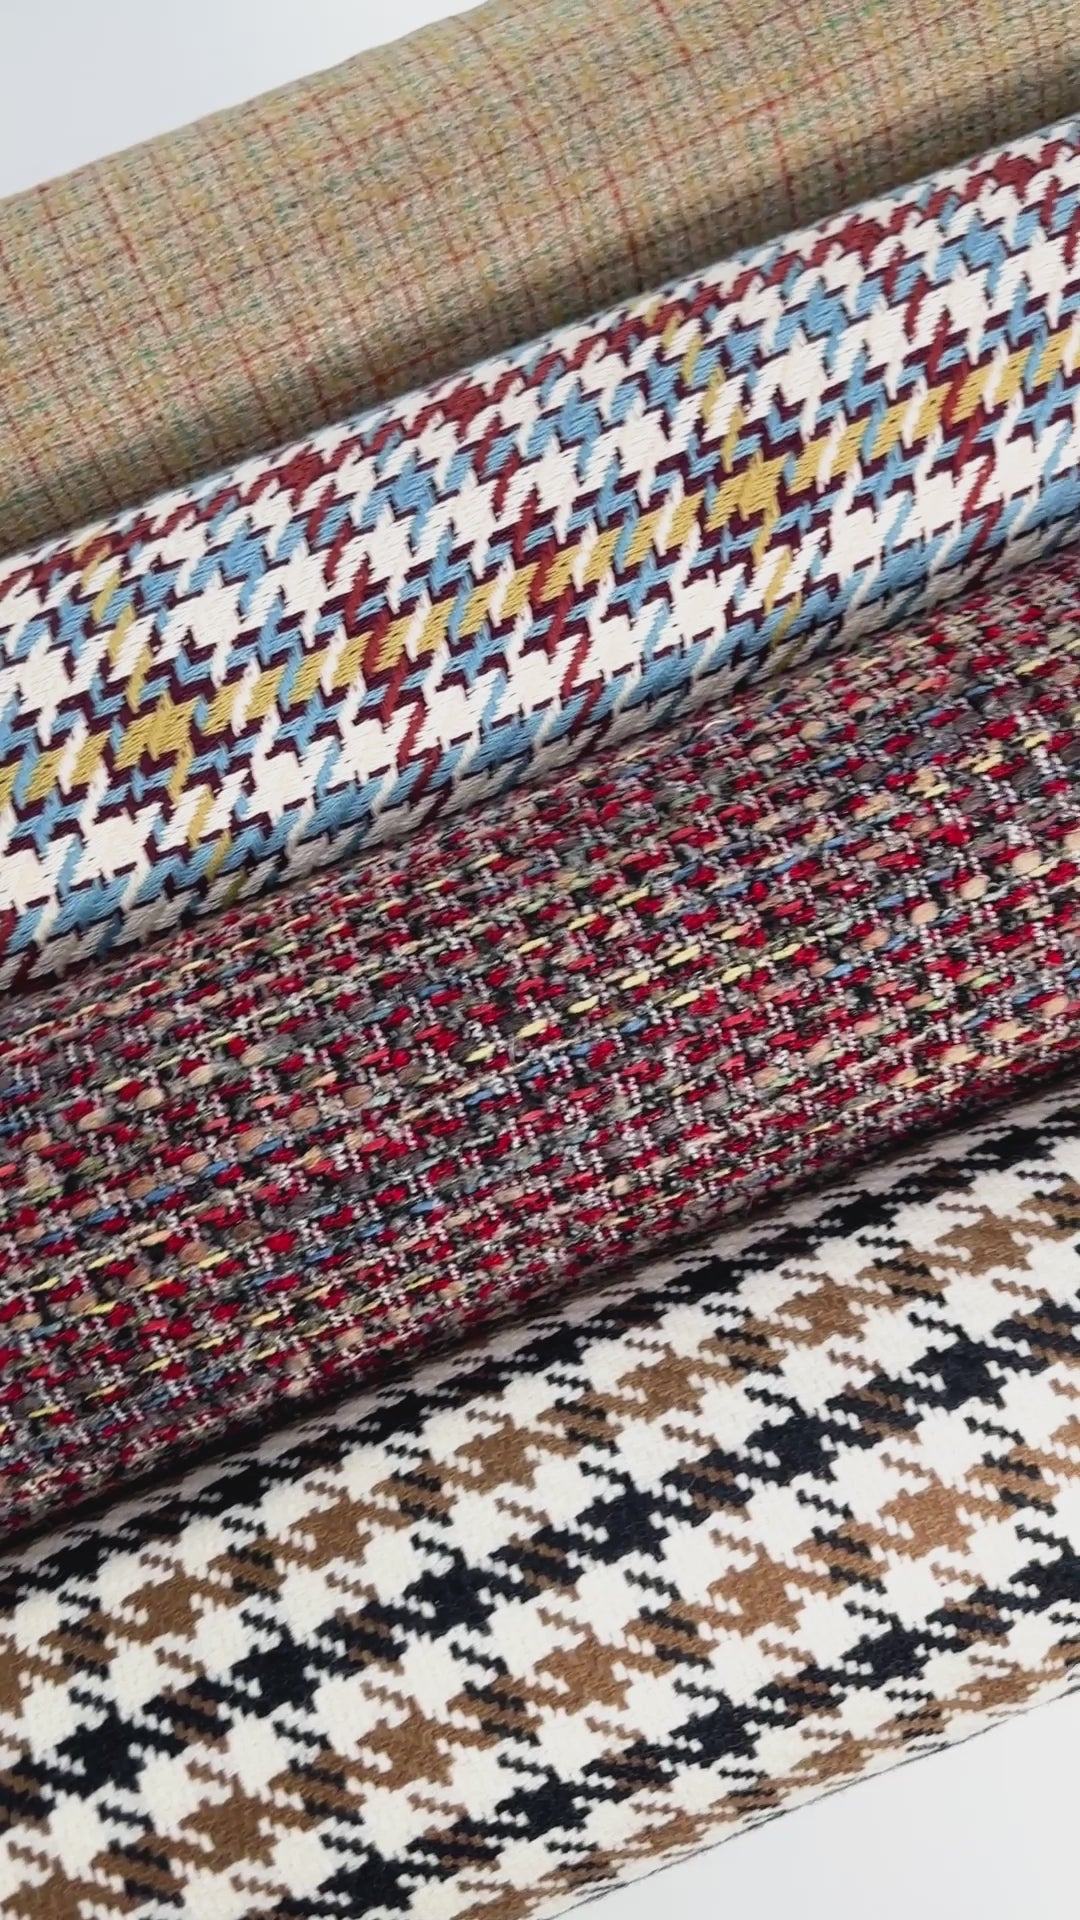 Fabric in cotton and wool with houndstooth pattern - multicolored